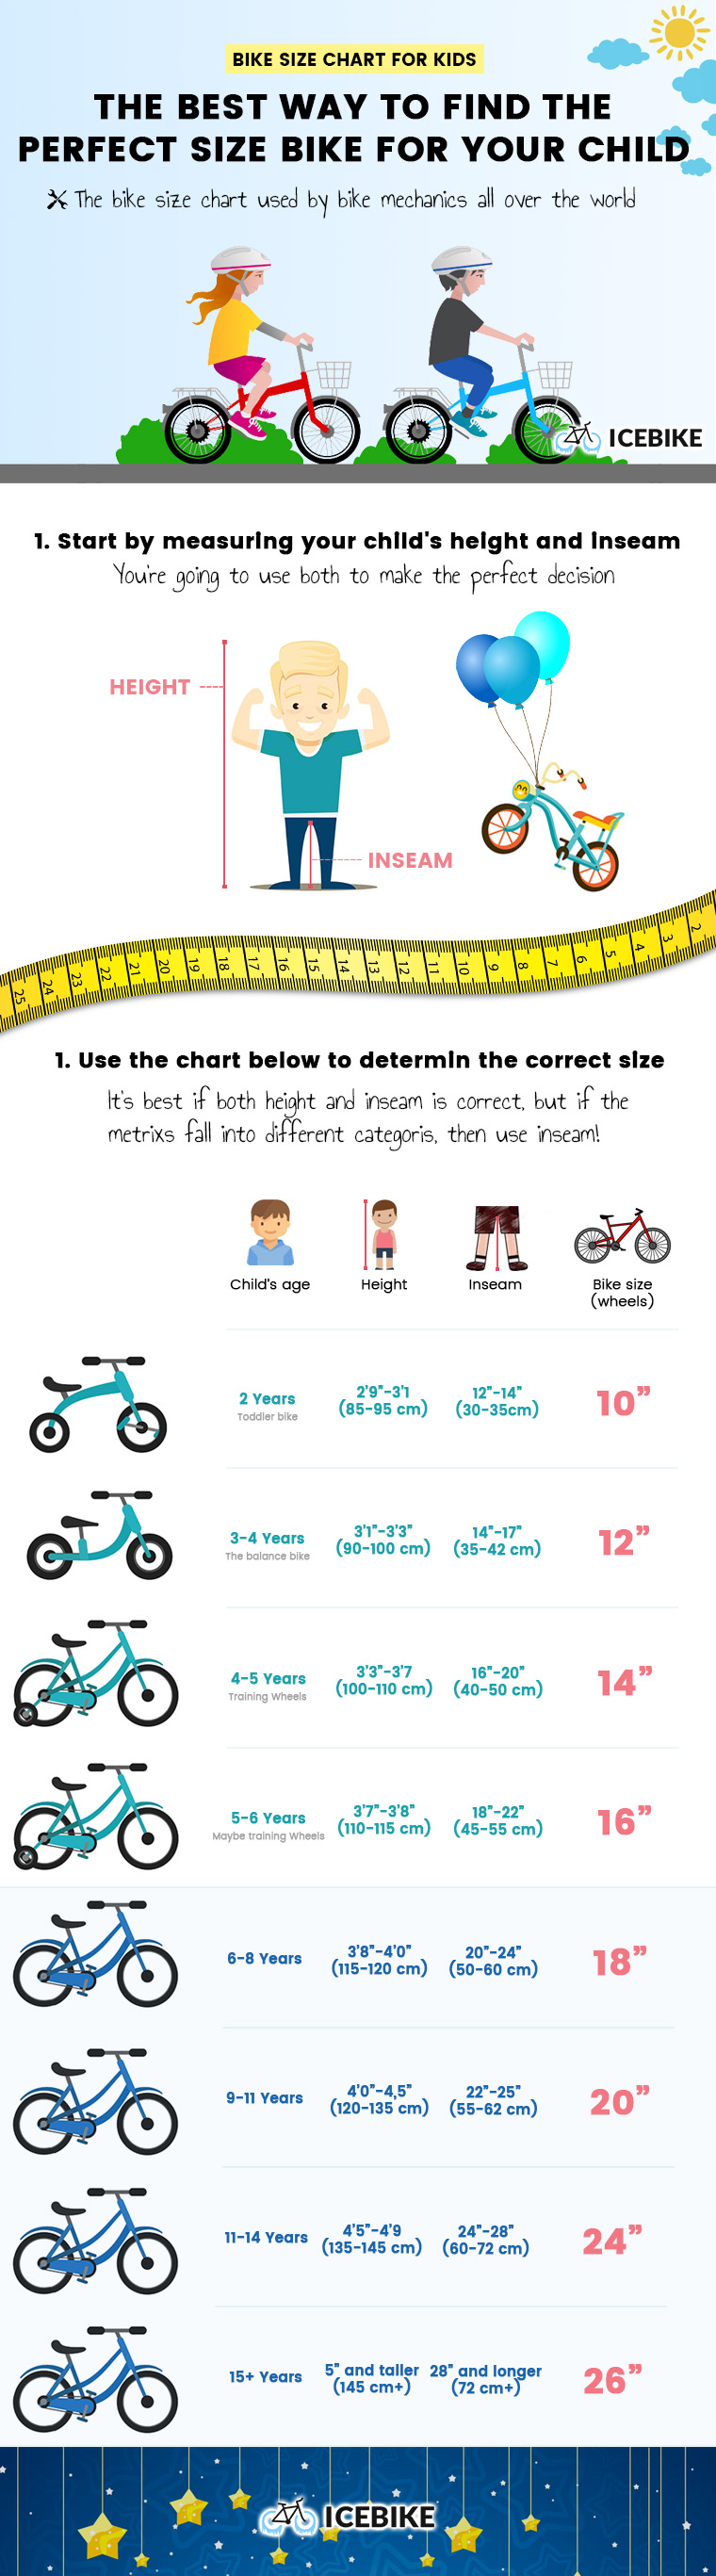 bike size for a 6 year old